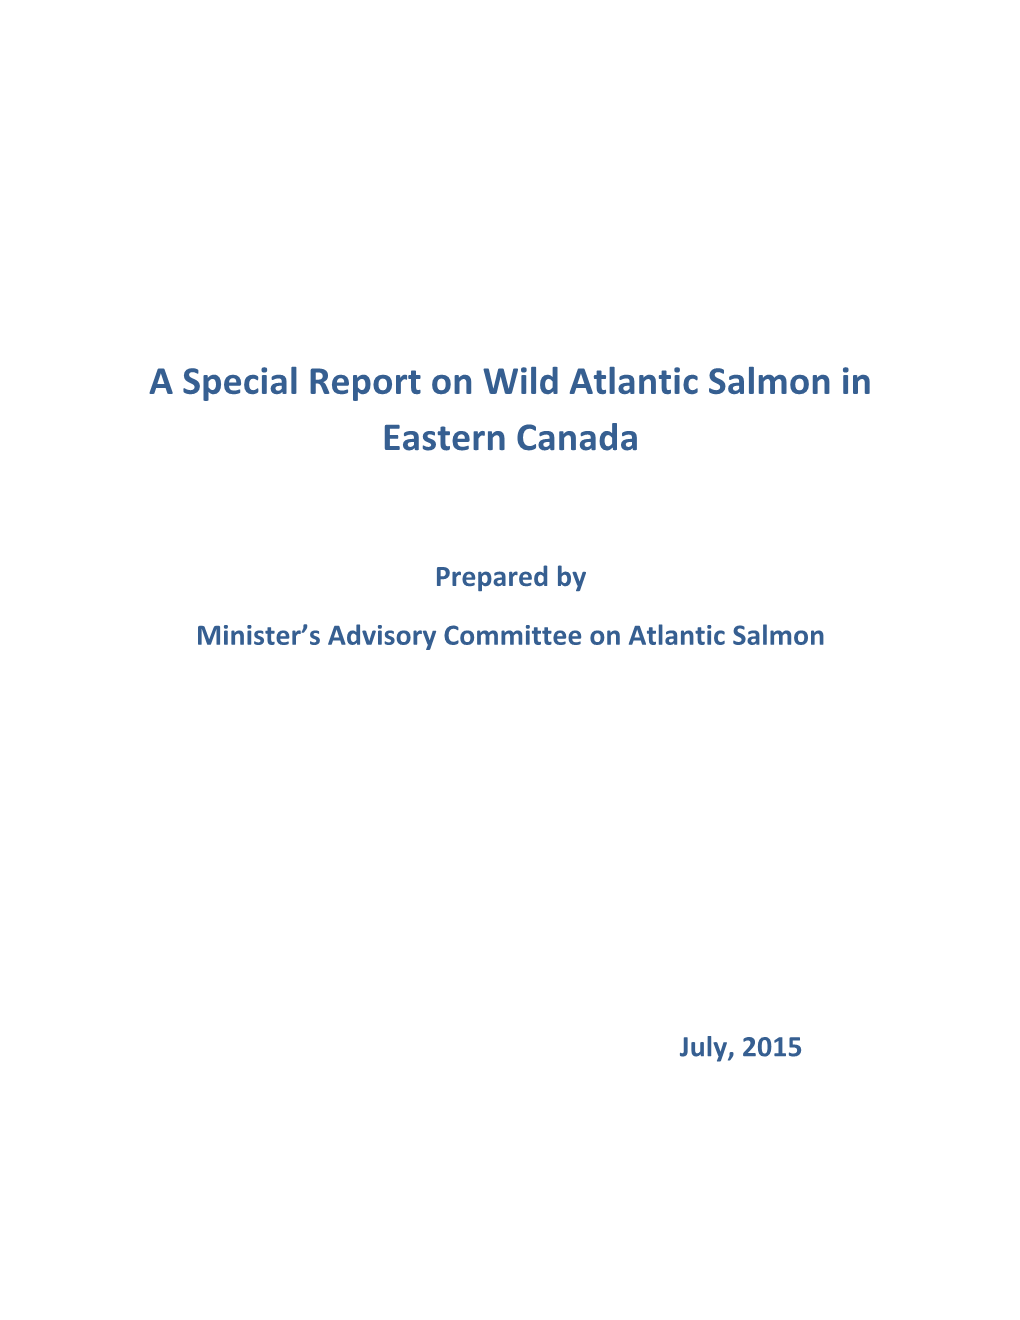 A Special Report on Wild Atlantic Salmon in Eastern Canada